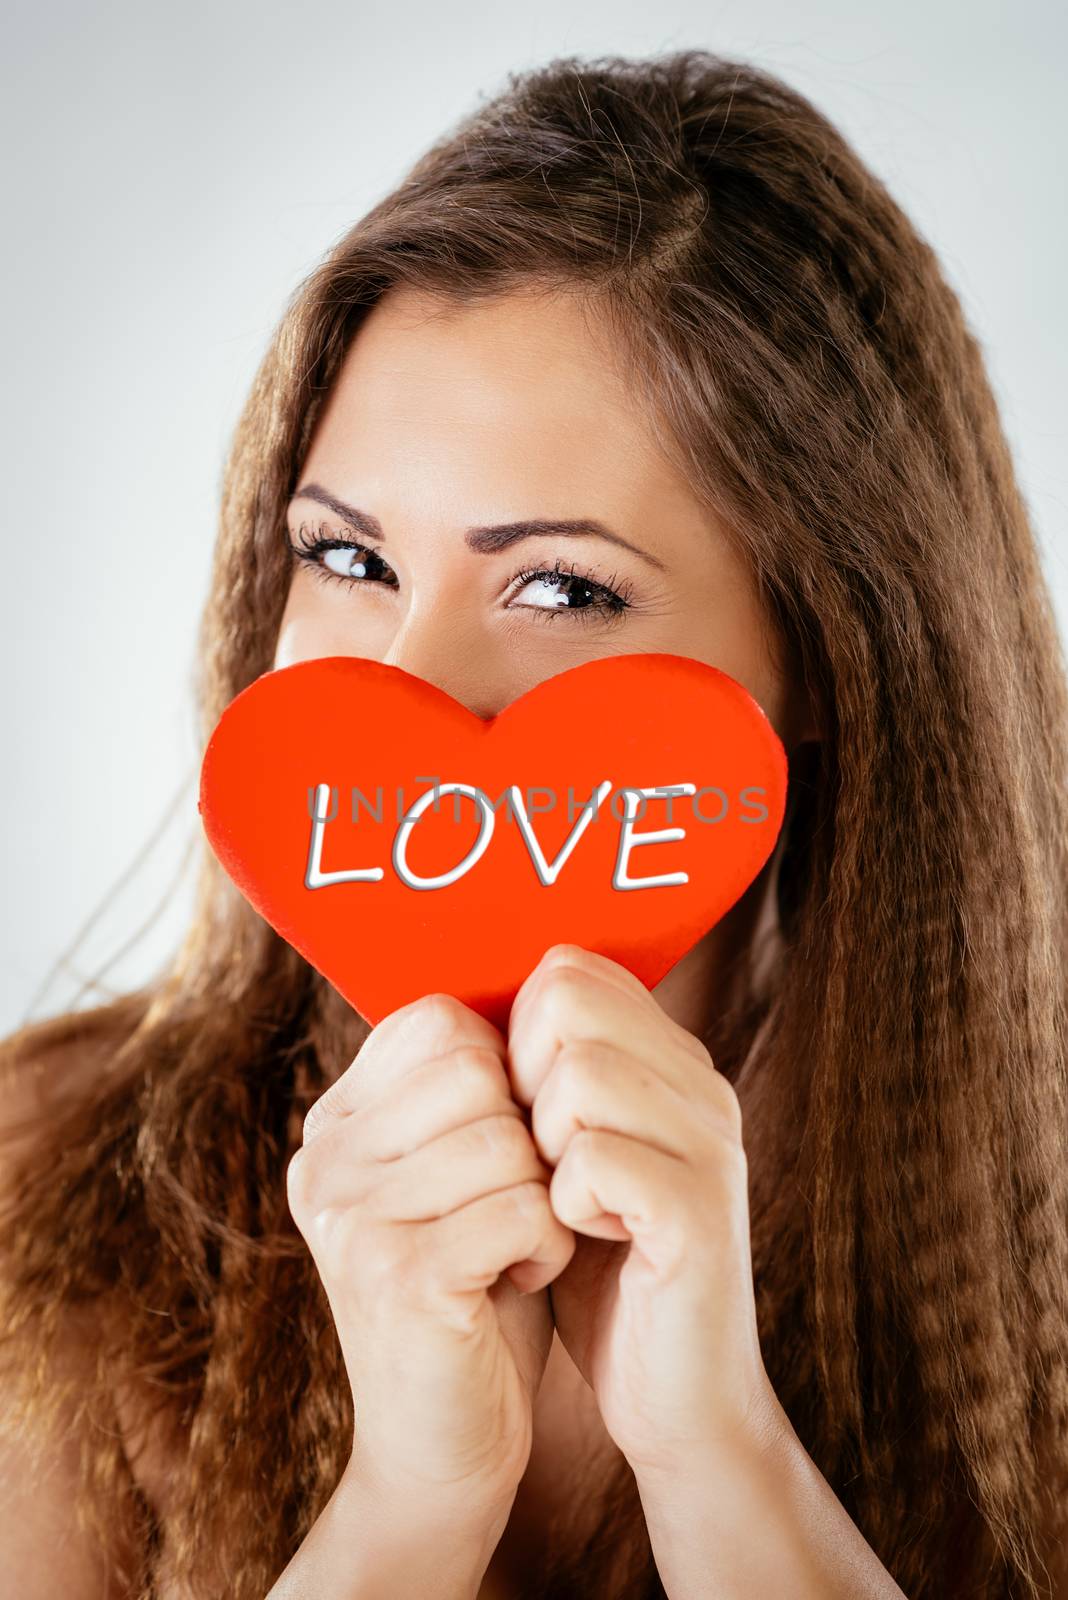 Beautiful smiling girl hiding behind a red heart that says Love. Looking at camera.